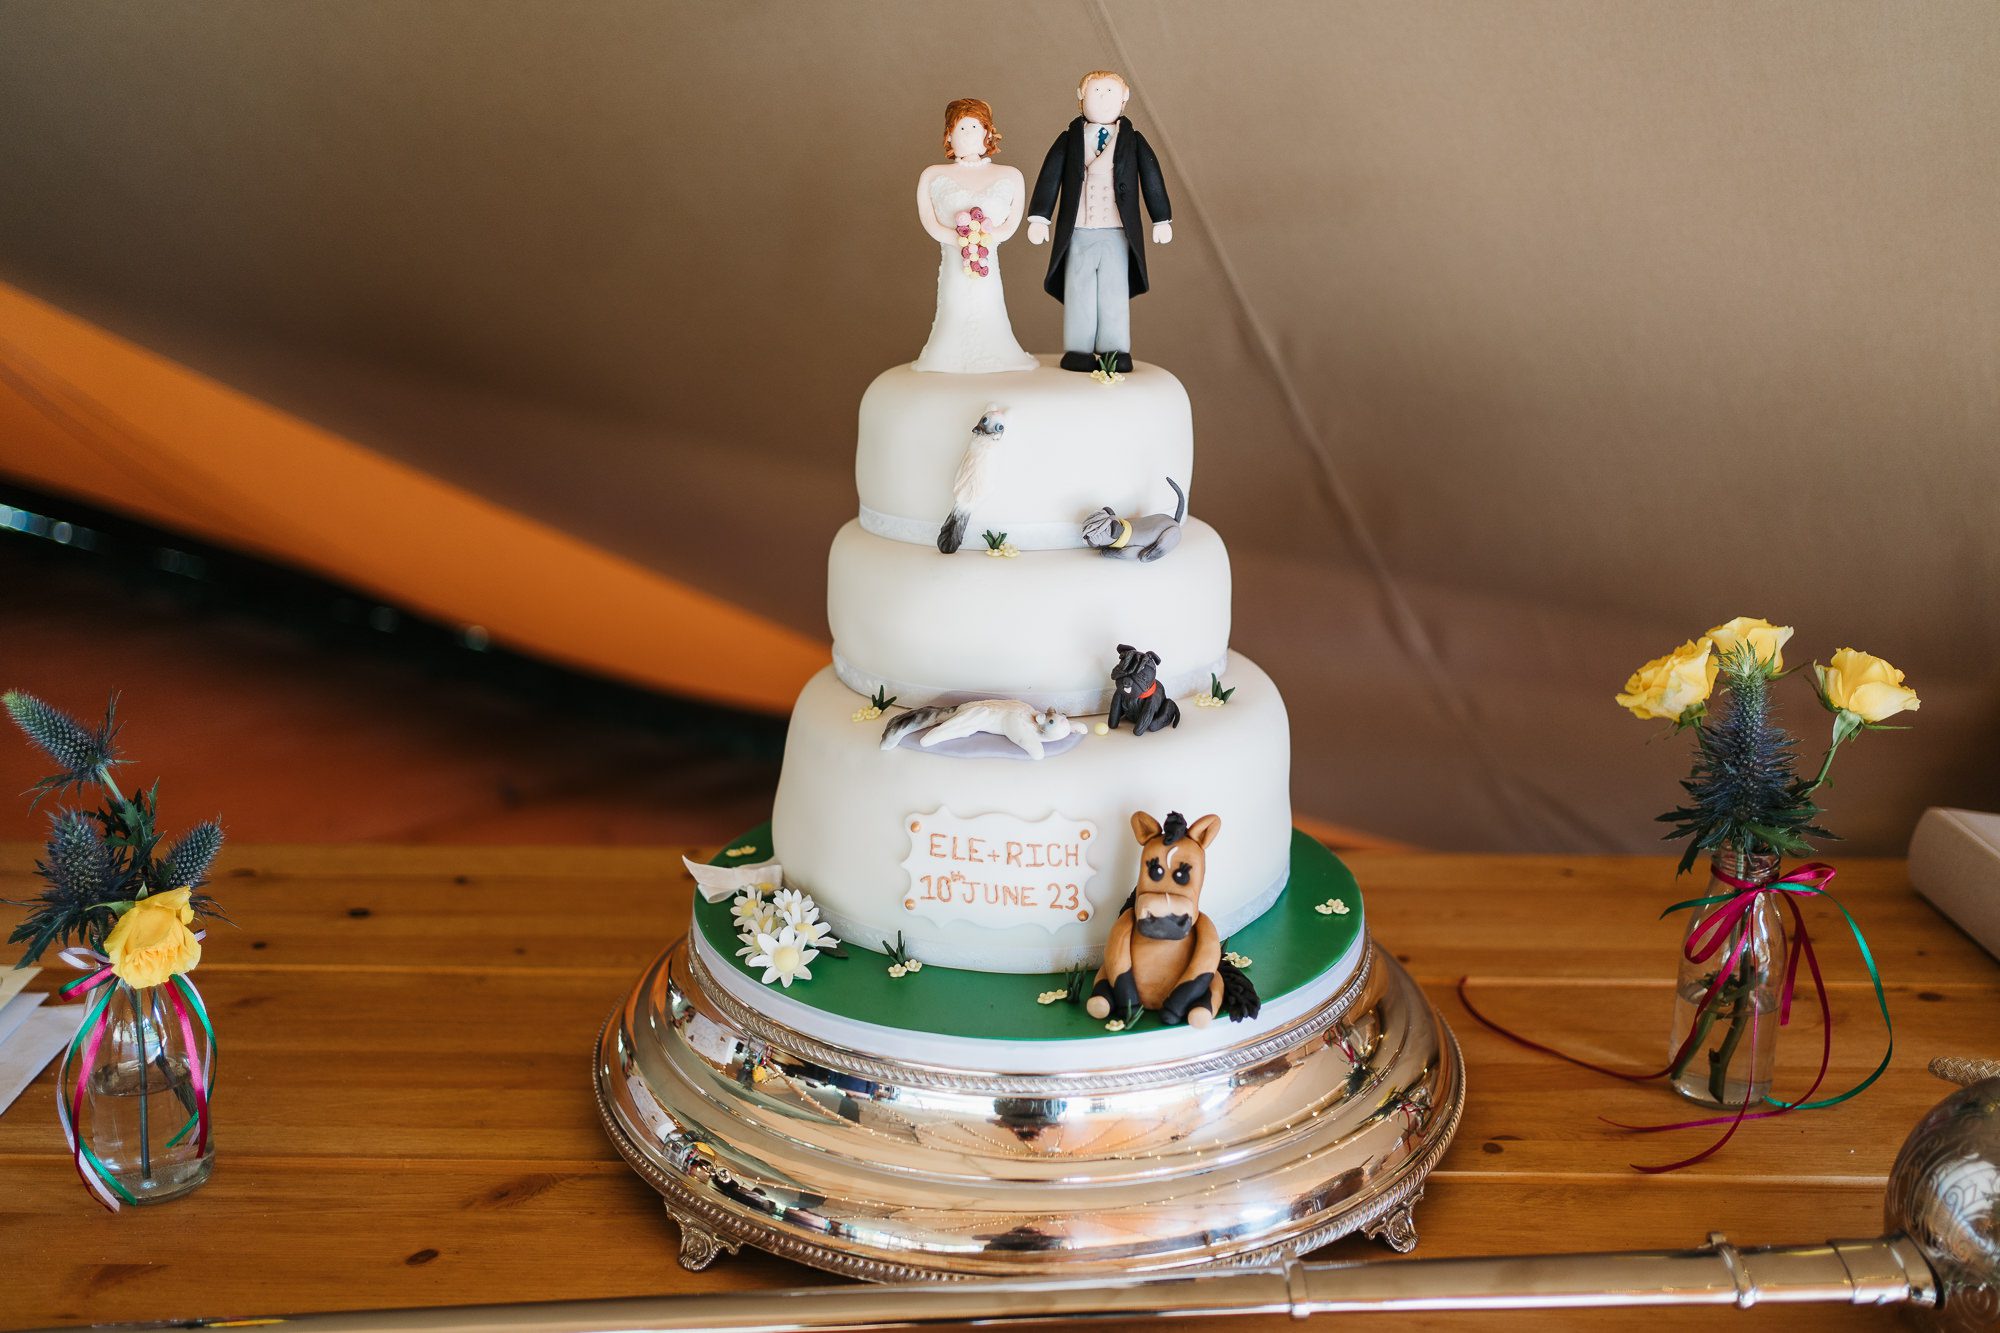 Handmade wedding cake featuring the bride and groom's pets.